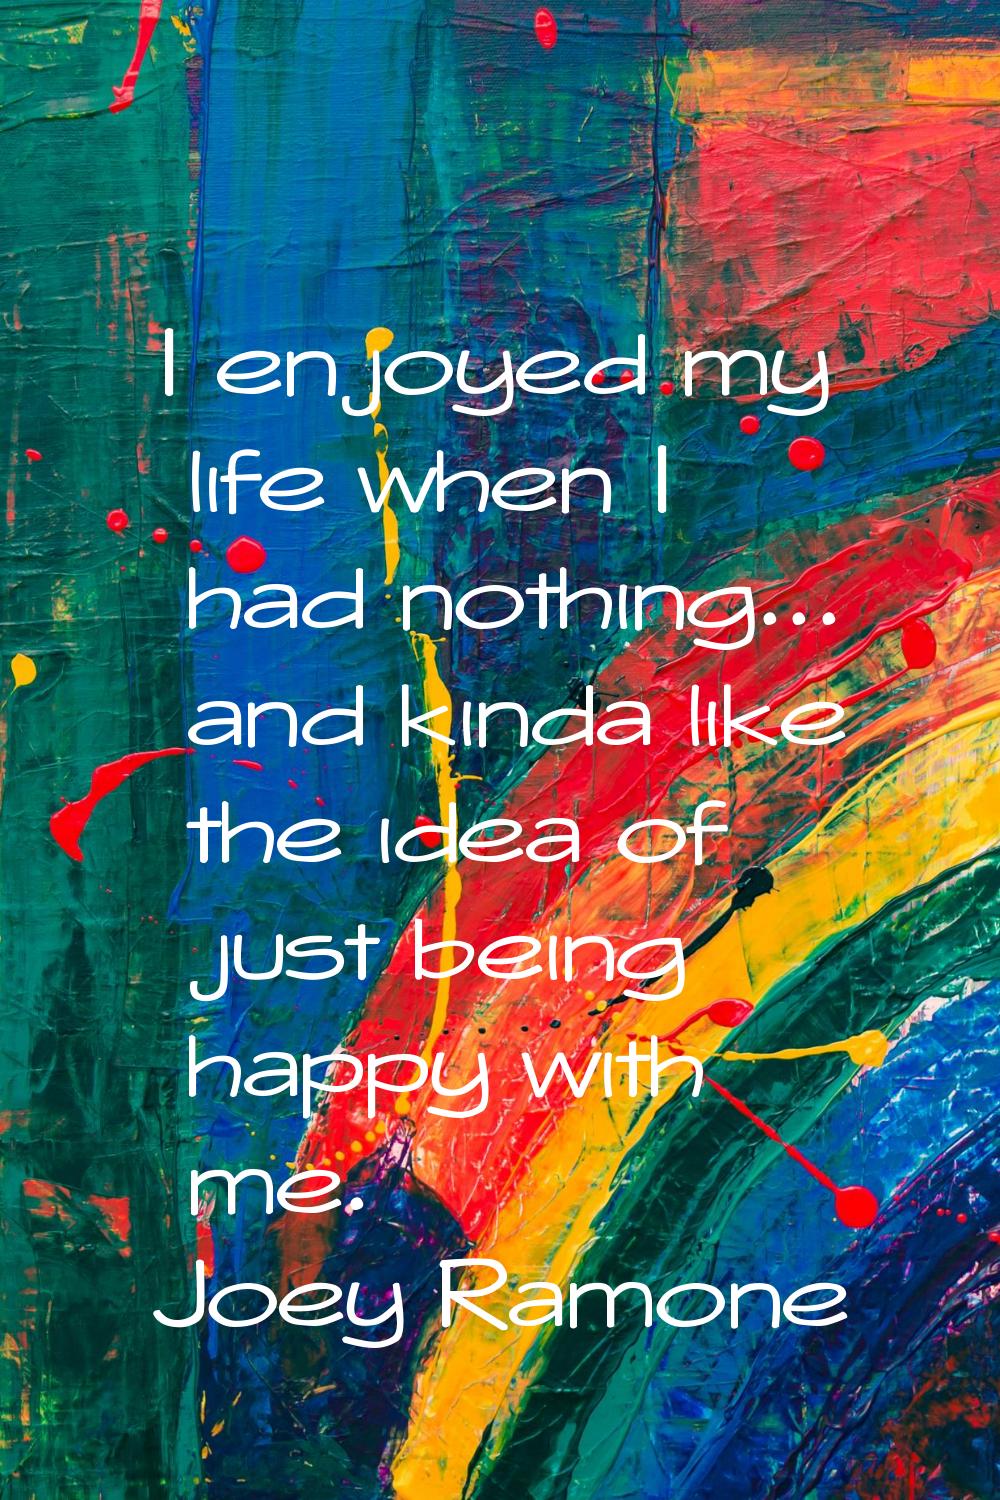 I enjoyed my life when I had nothing... and kinda like the idea of just being happy with me.